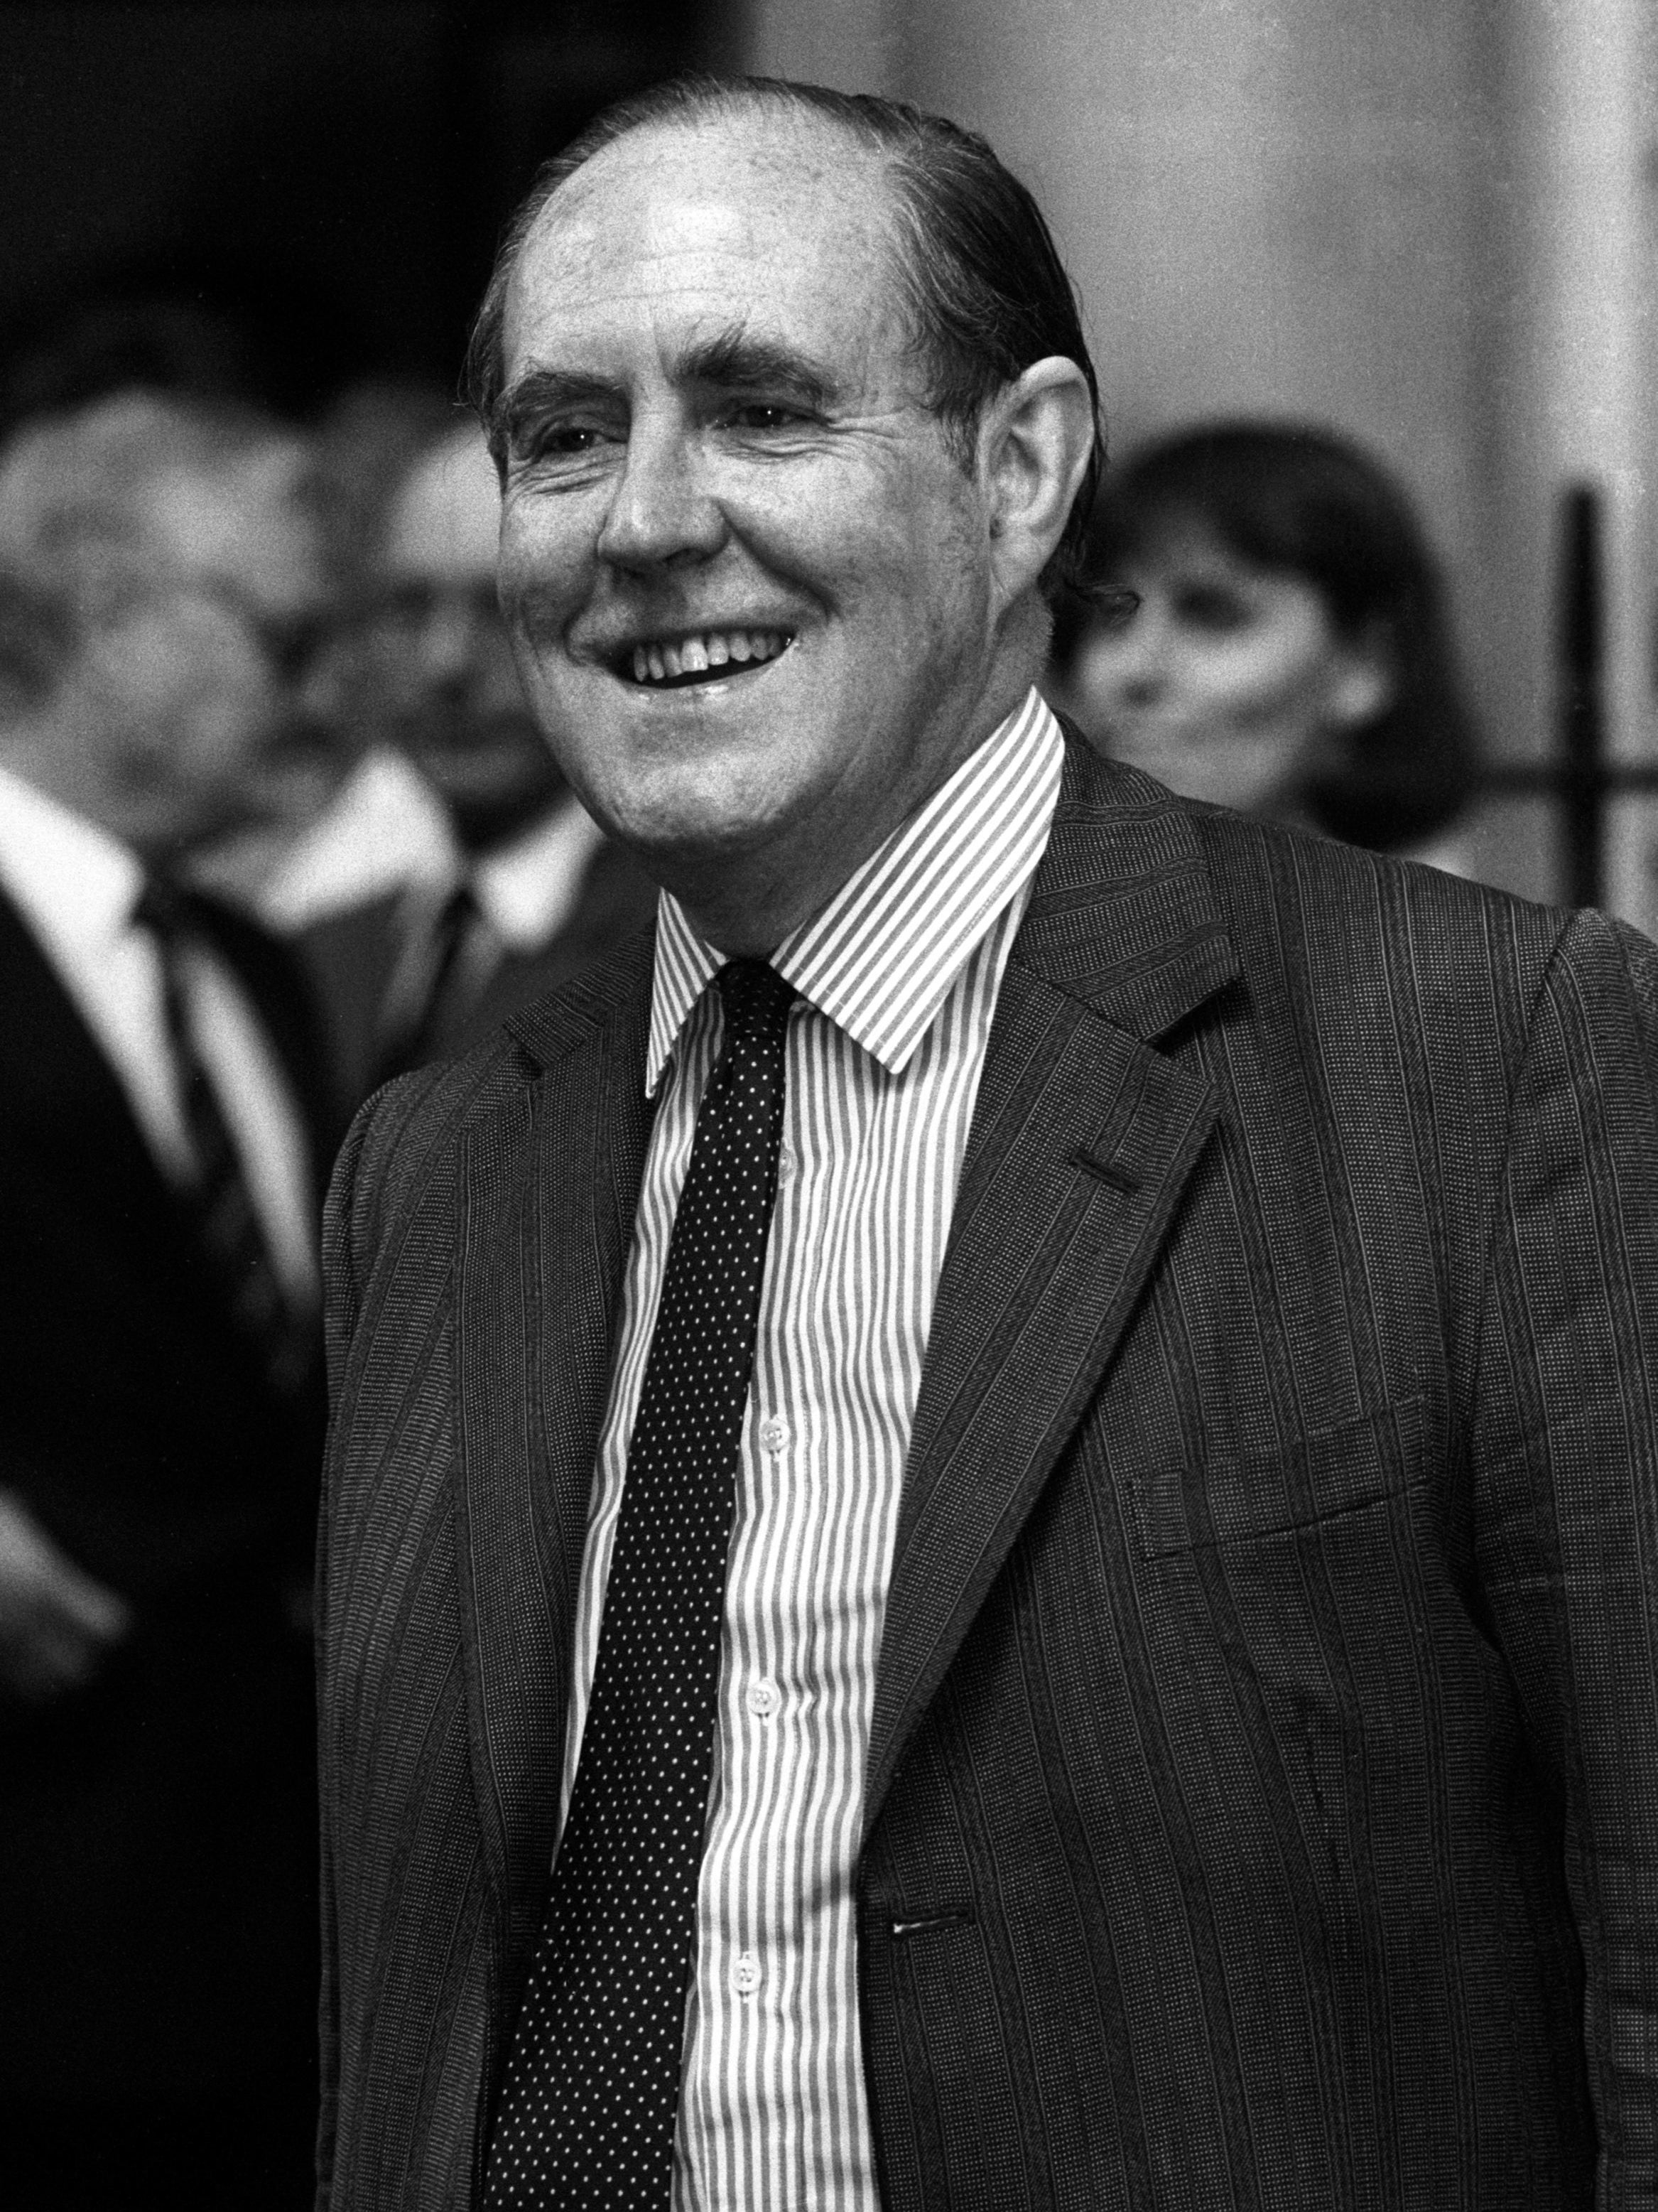 Brooke pictured in August 1989, shortly after being appointed Northern Ireland secretary